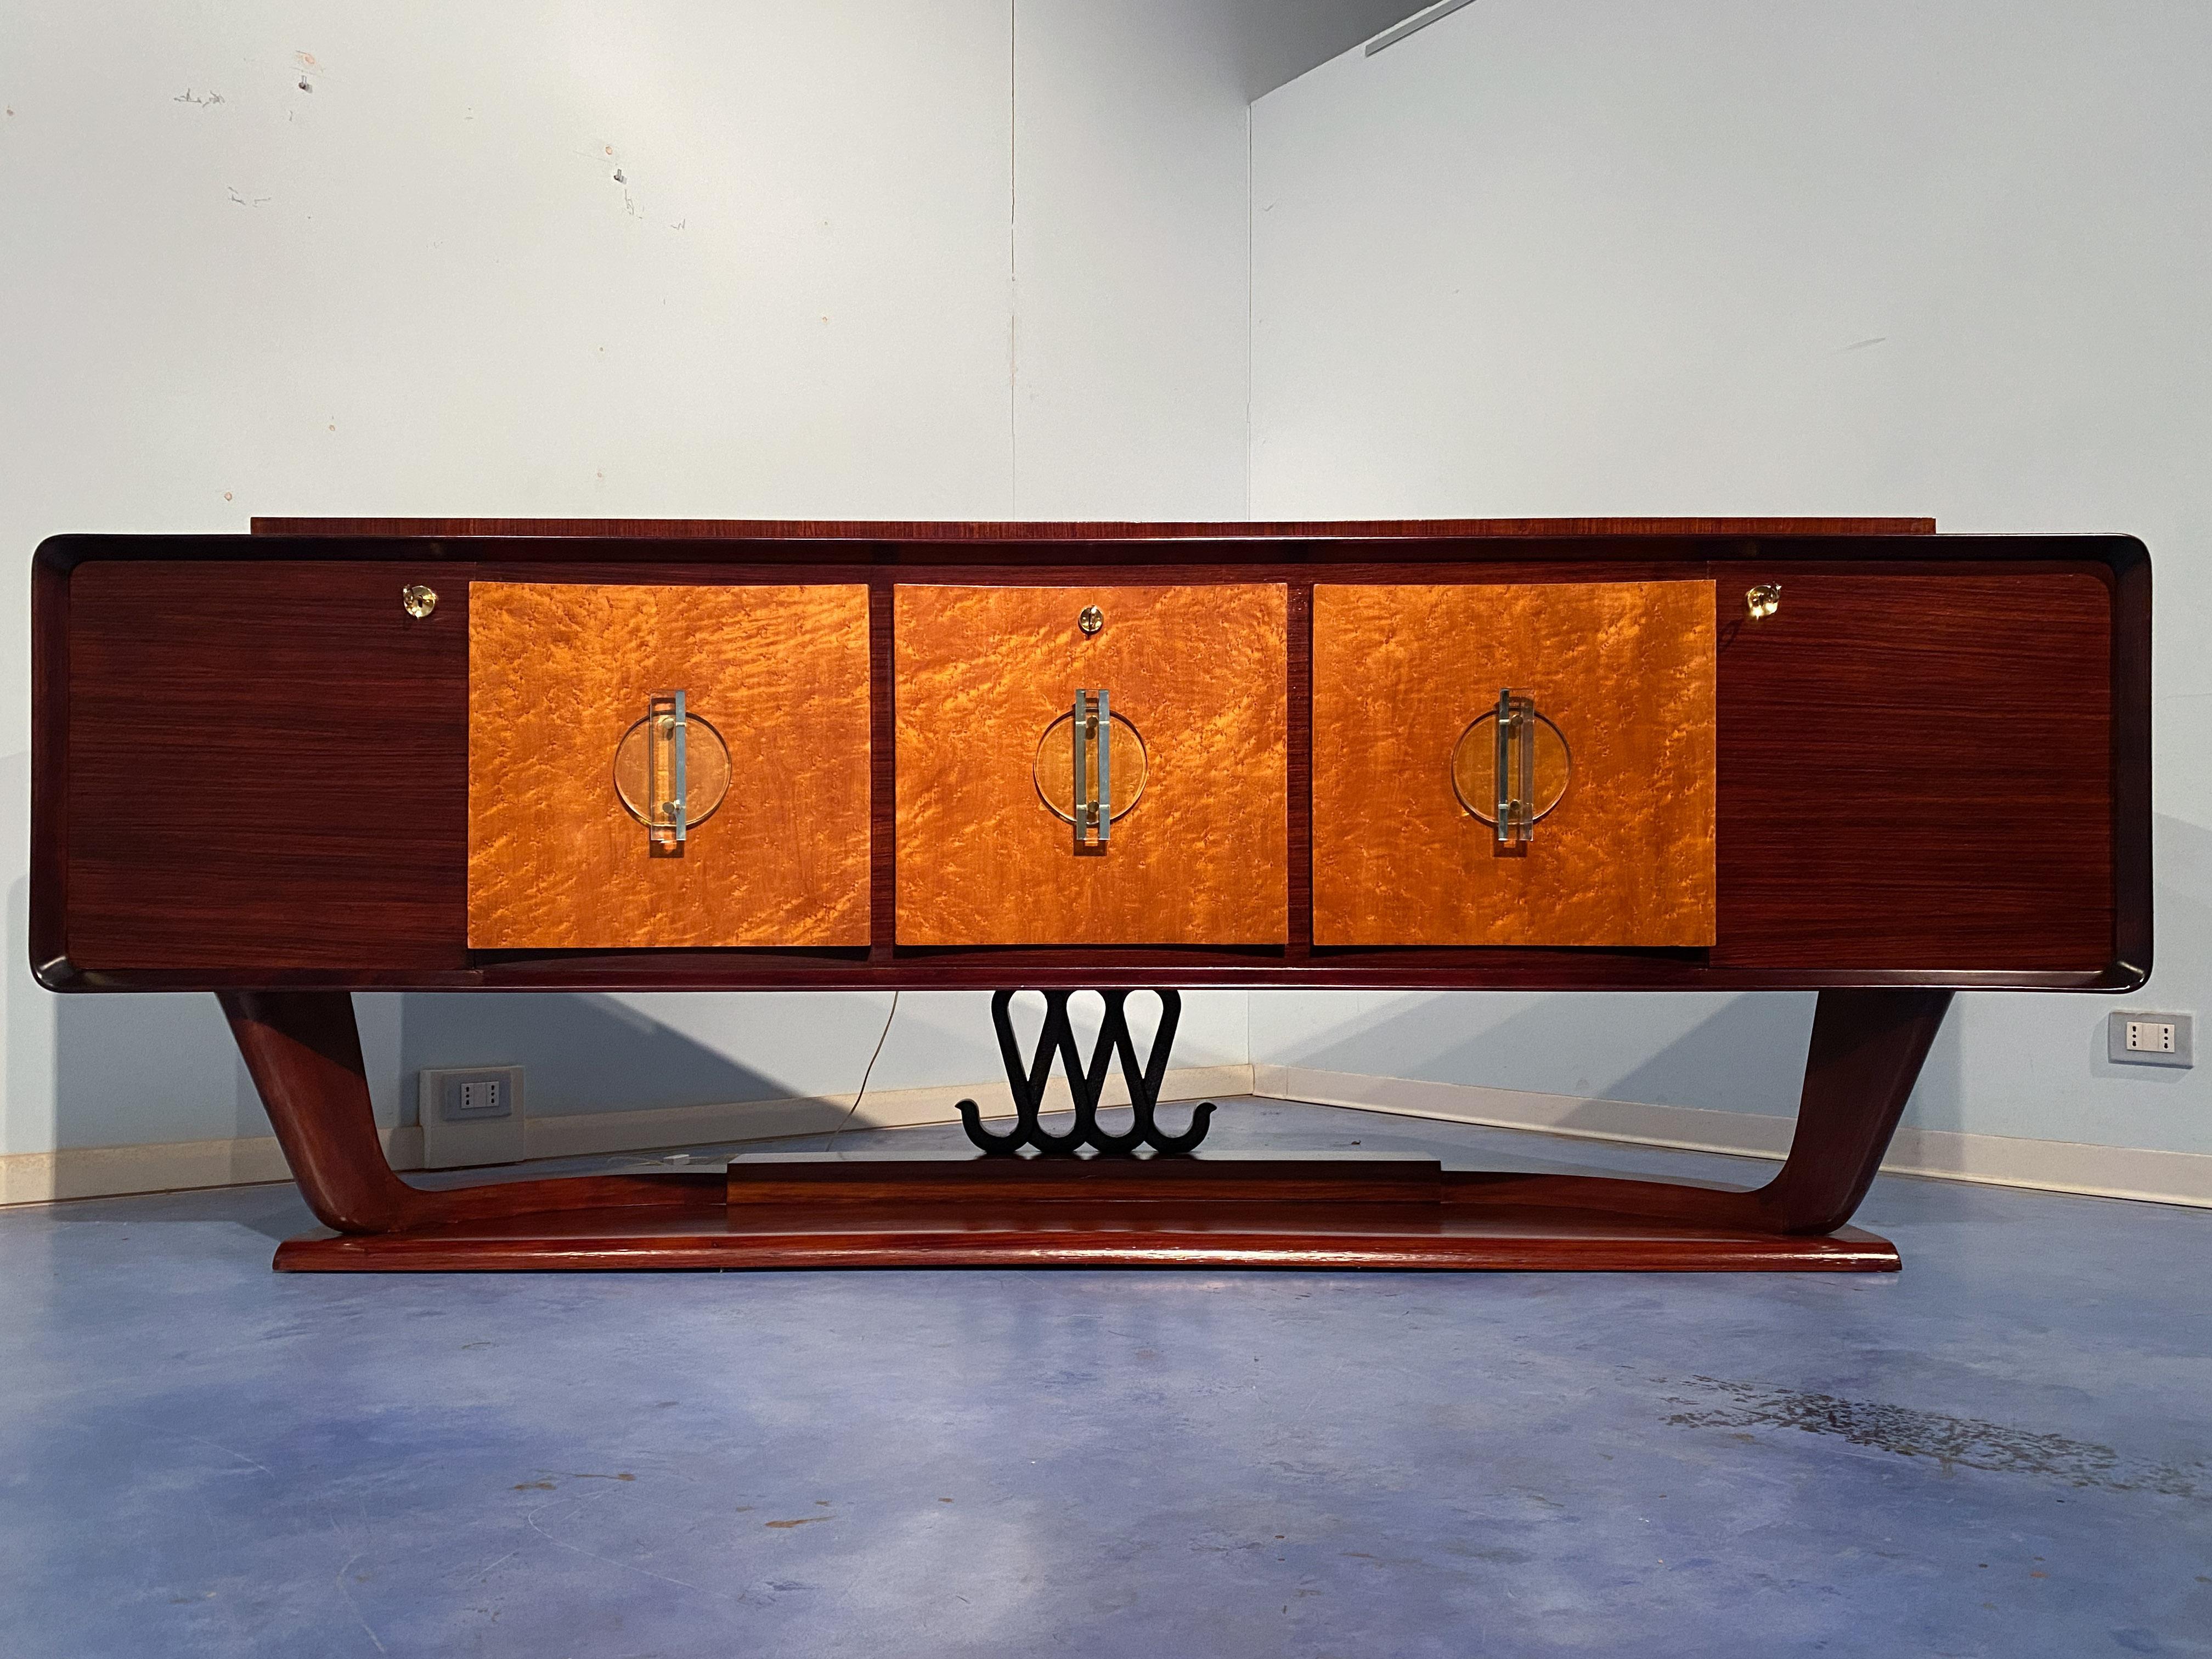 Osvaldo Borsani designed this beautiful Italian sideboard in the 1940s. With its unique design and excellent manufacturing quality, the sideboard stands out from the crowd.

The glass handles on the three central doors are magnificent. The slight